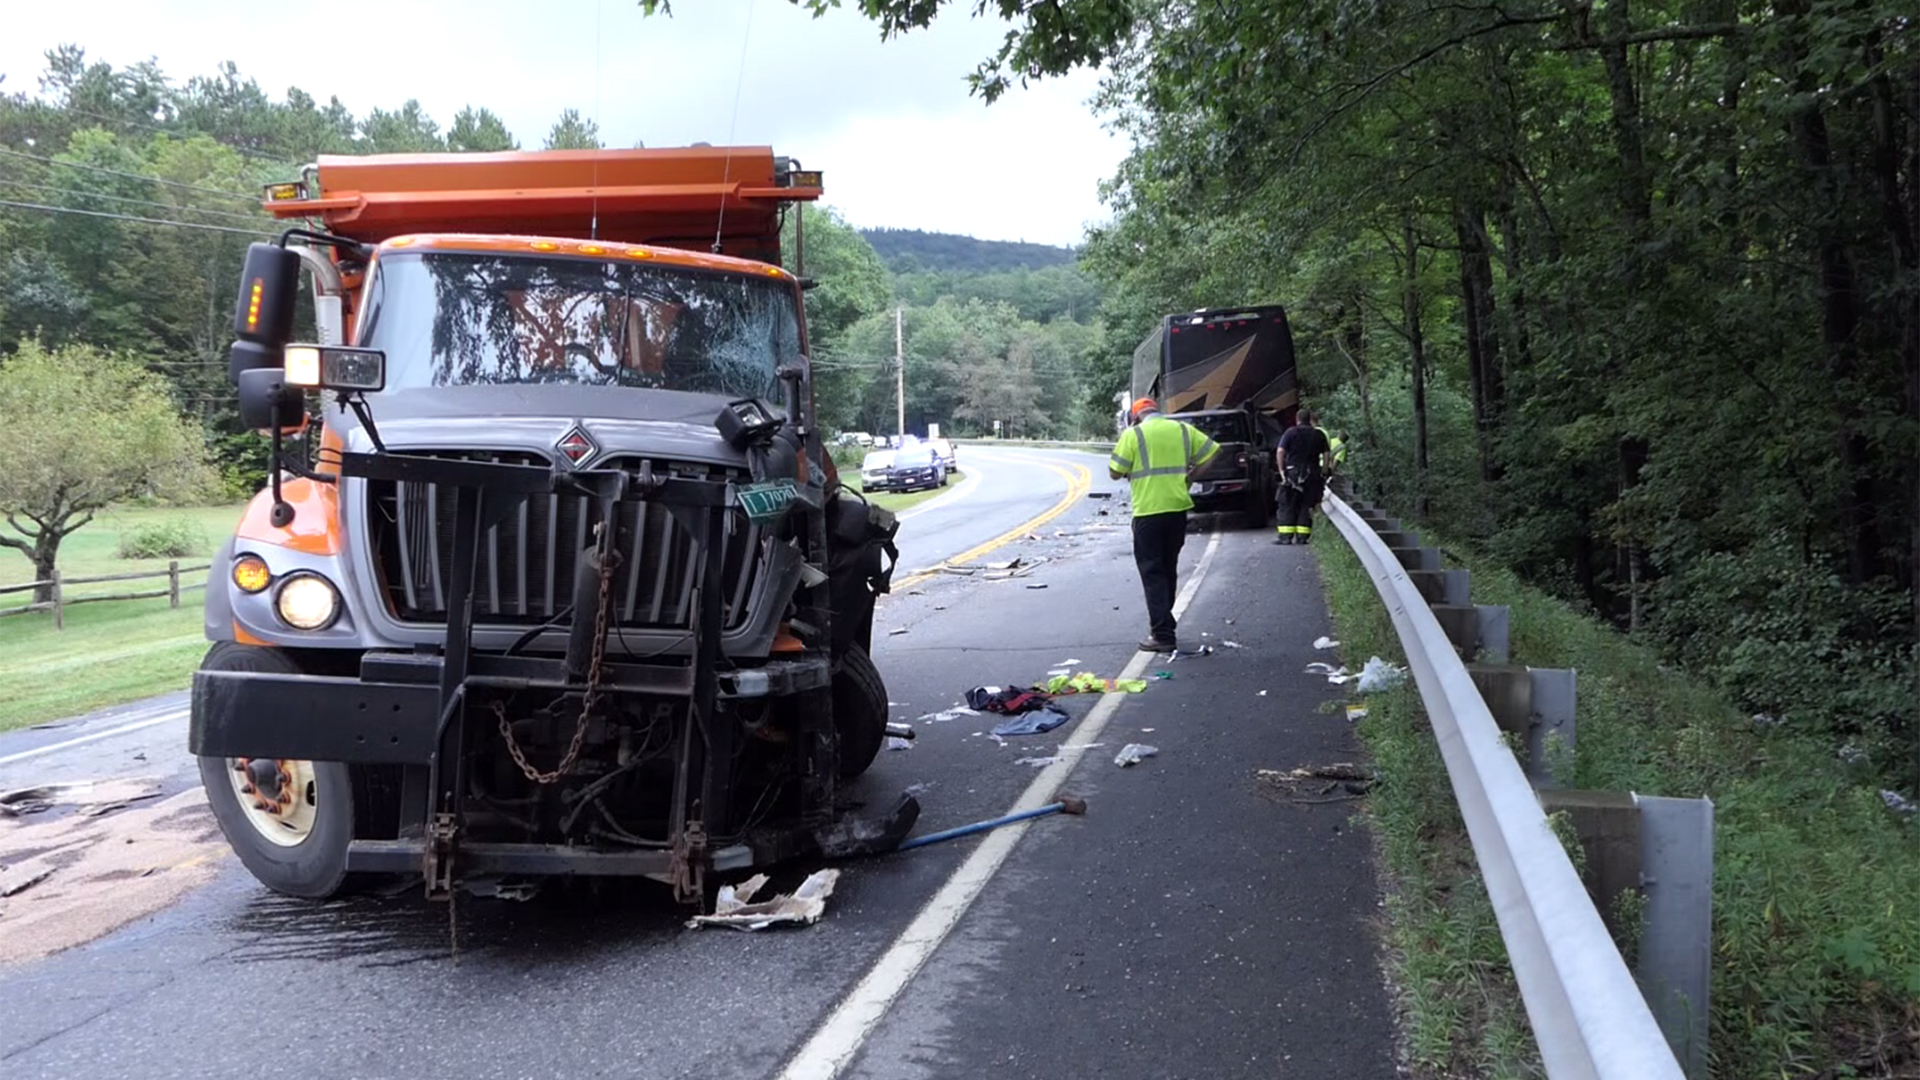 Dog leads police to truck damaged in crash on NH-VT border